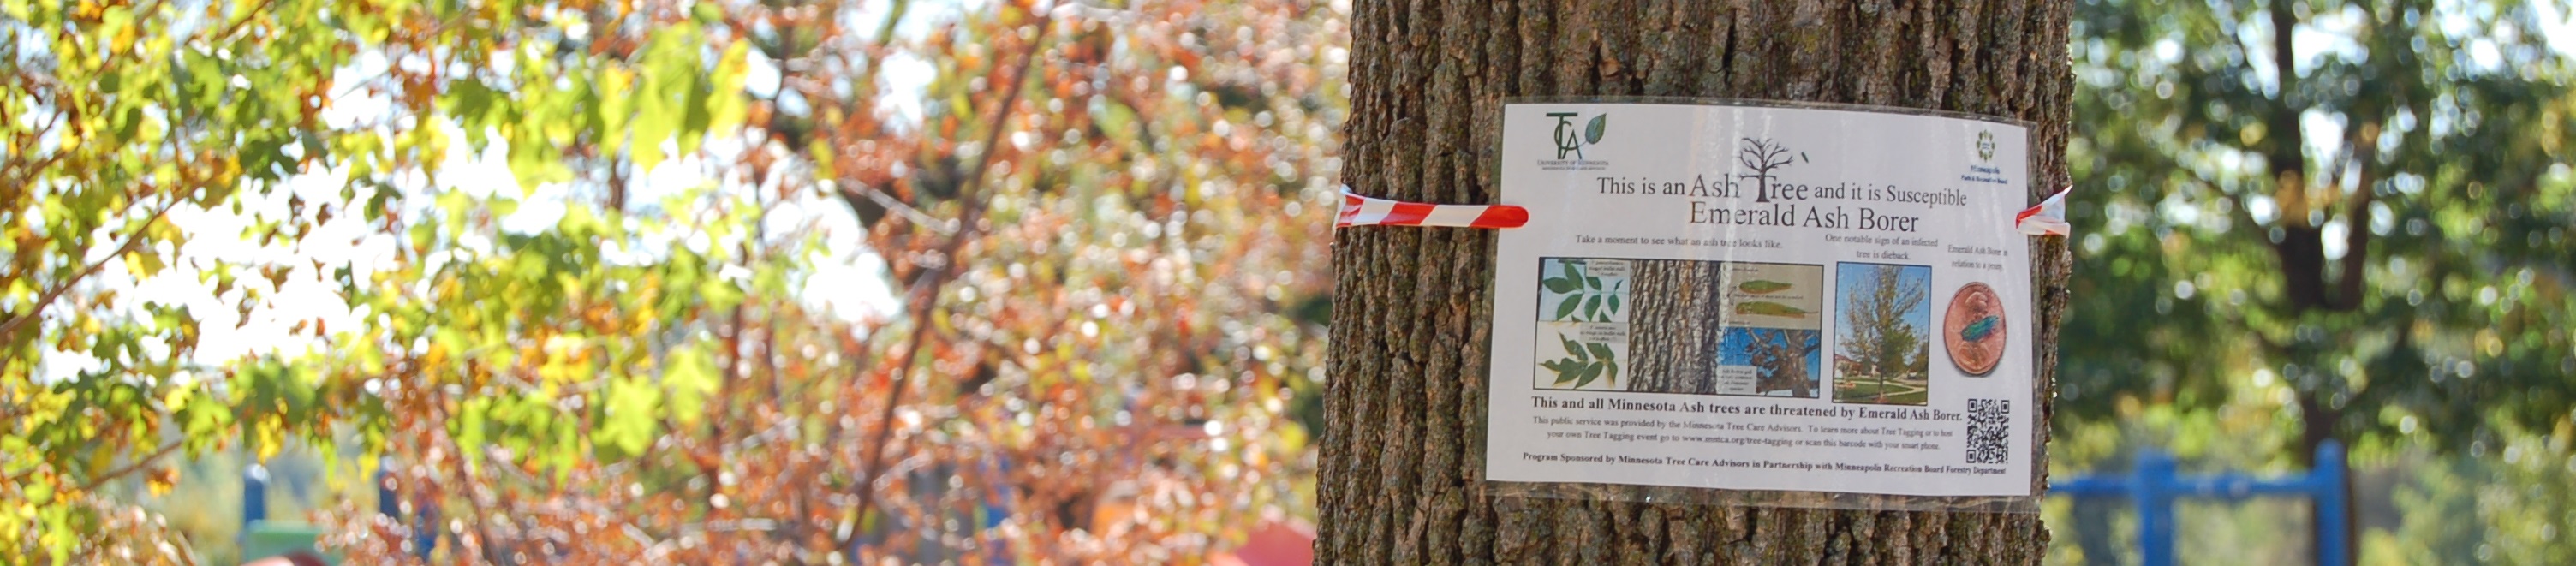 image of an ash tree with a warning tag for emerald ash borer beatle